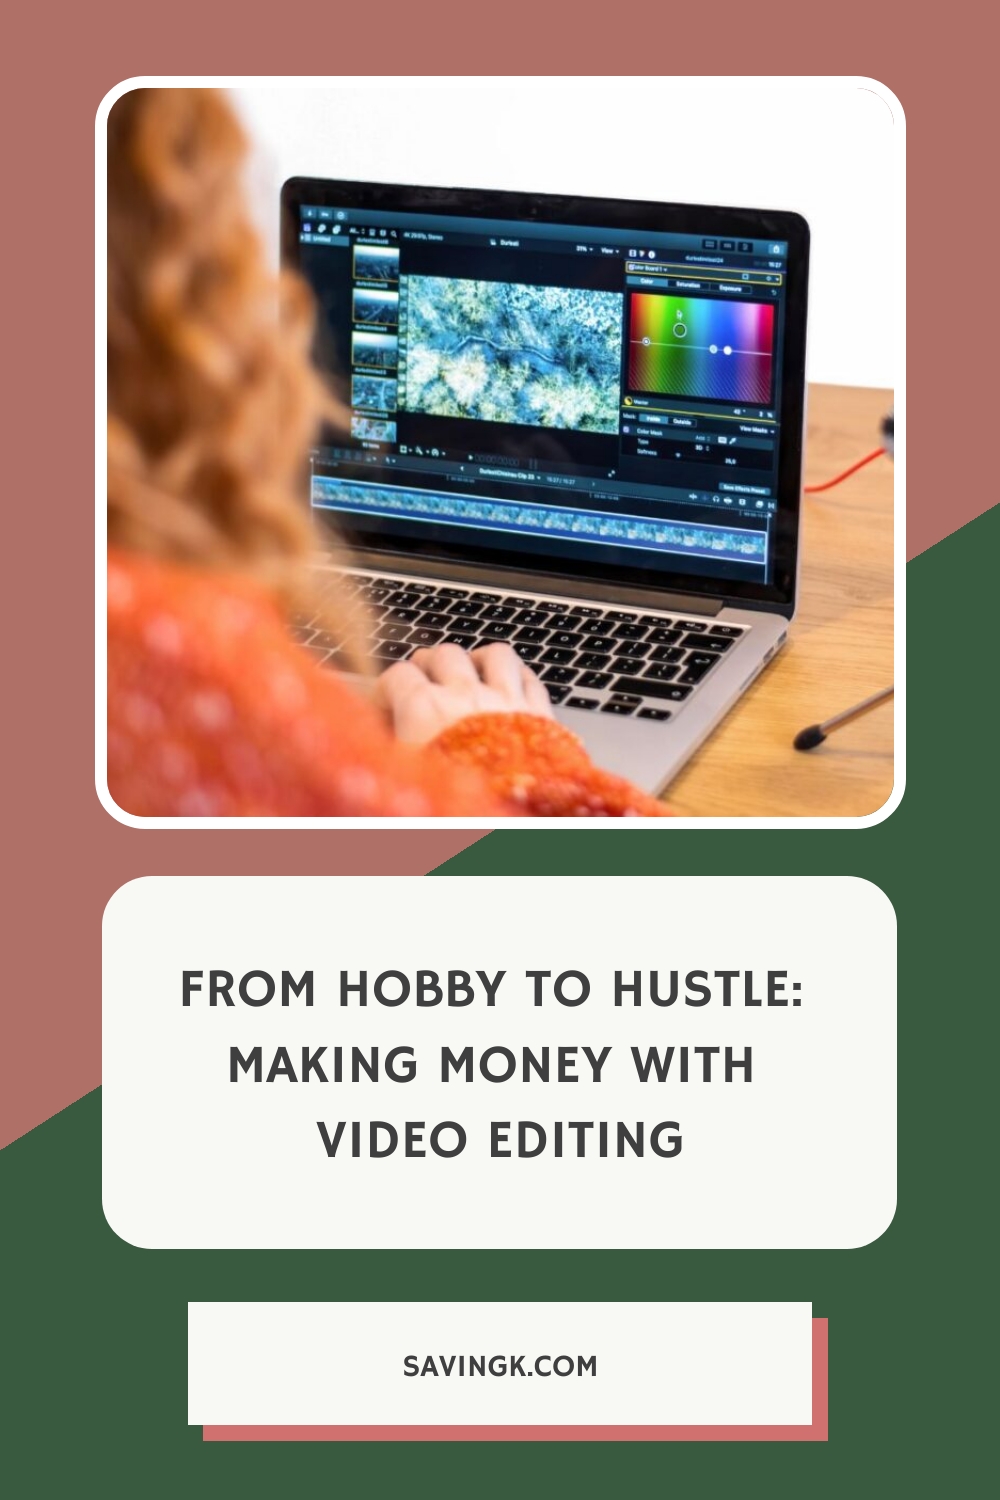 From Hobby to Hustle: Making Money with Video Editing